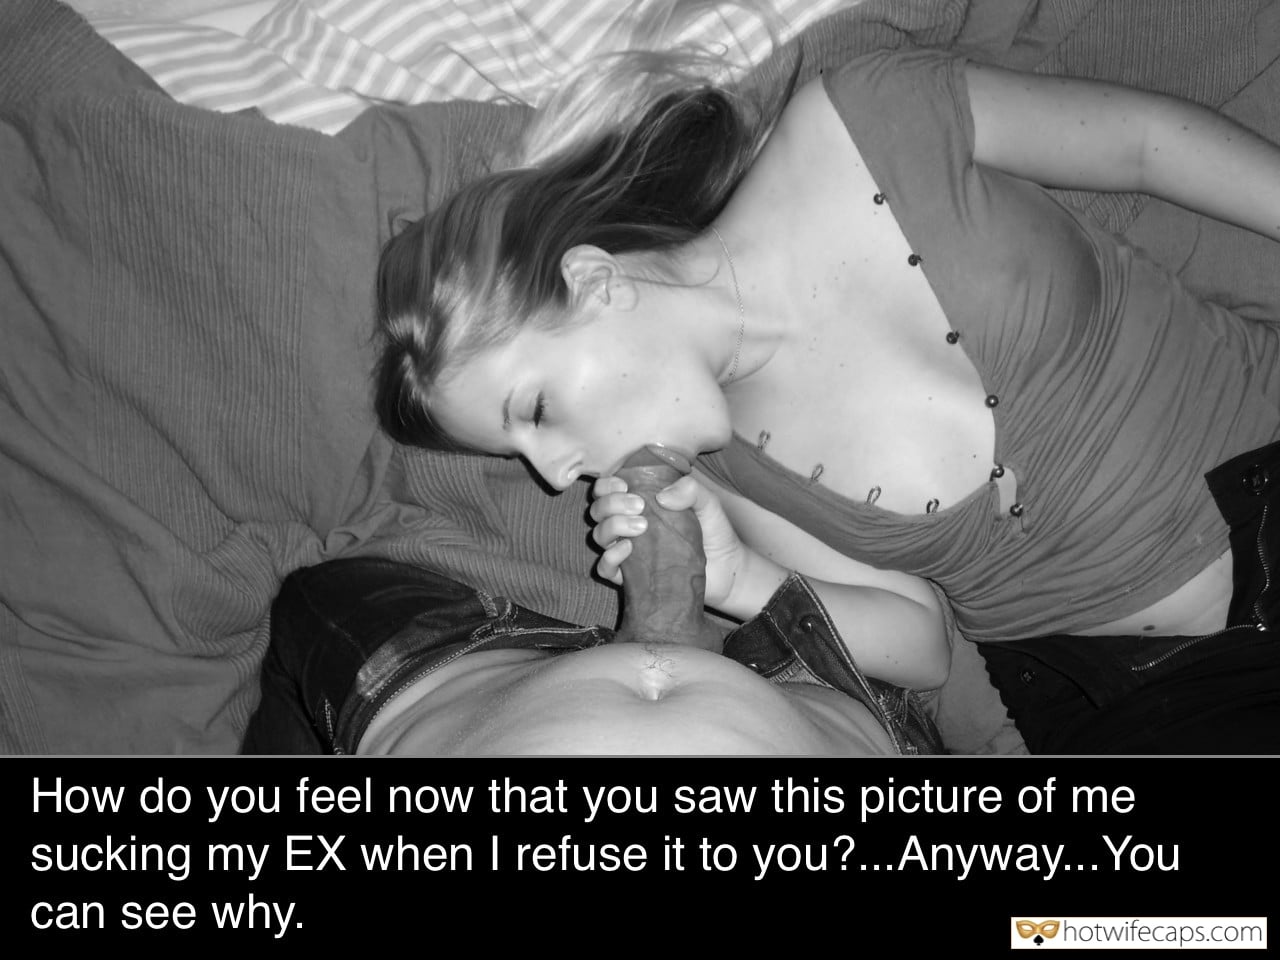 It's too big Ex Boyfriend Blowjob Bigger Cock hotwife caption: How do you feel now that you saw this picture of me sucking my EX when I refuse it to you?… Anyway… You can see why. Thick Cock of Her Ex in Your Wive’s Mouth